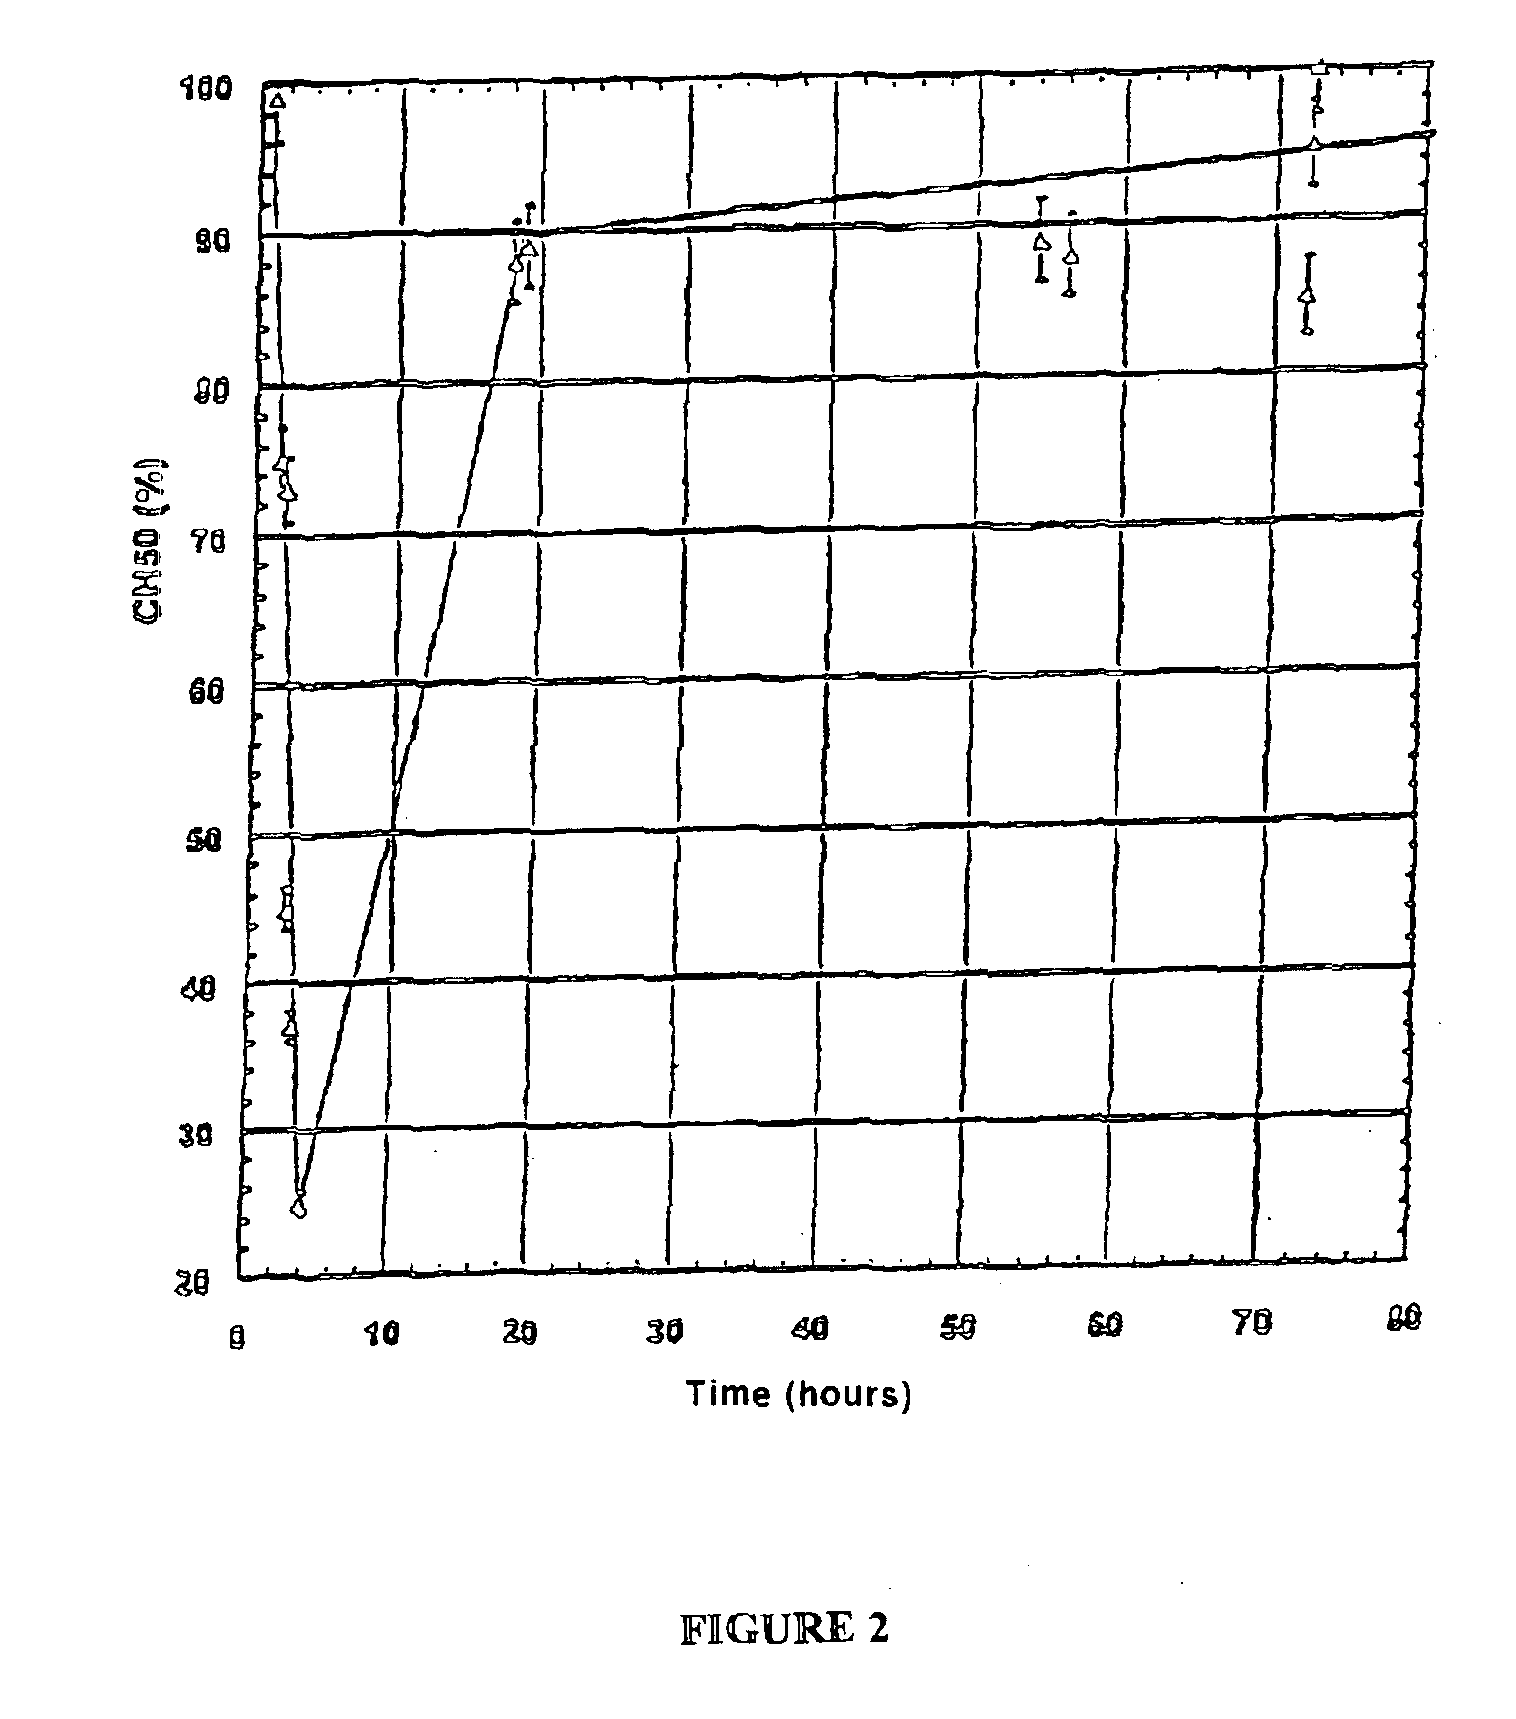 Pharmaceutical compositions with wound healing or anti-complementary activity comprising a dextran derivative